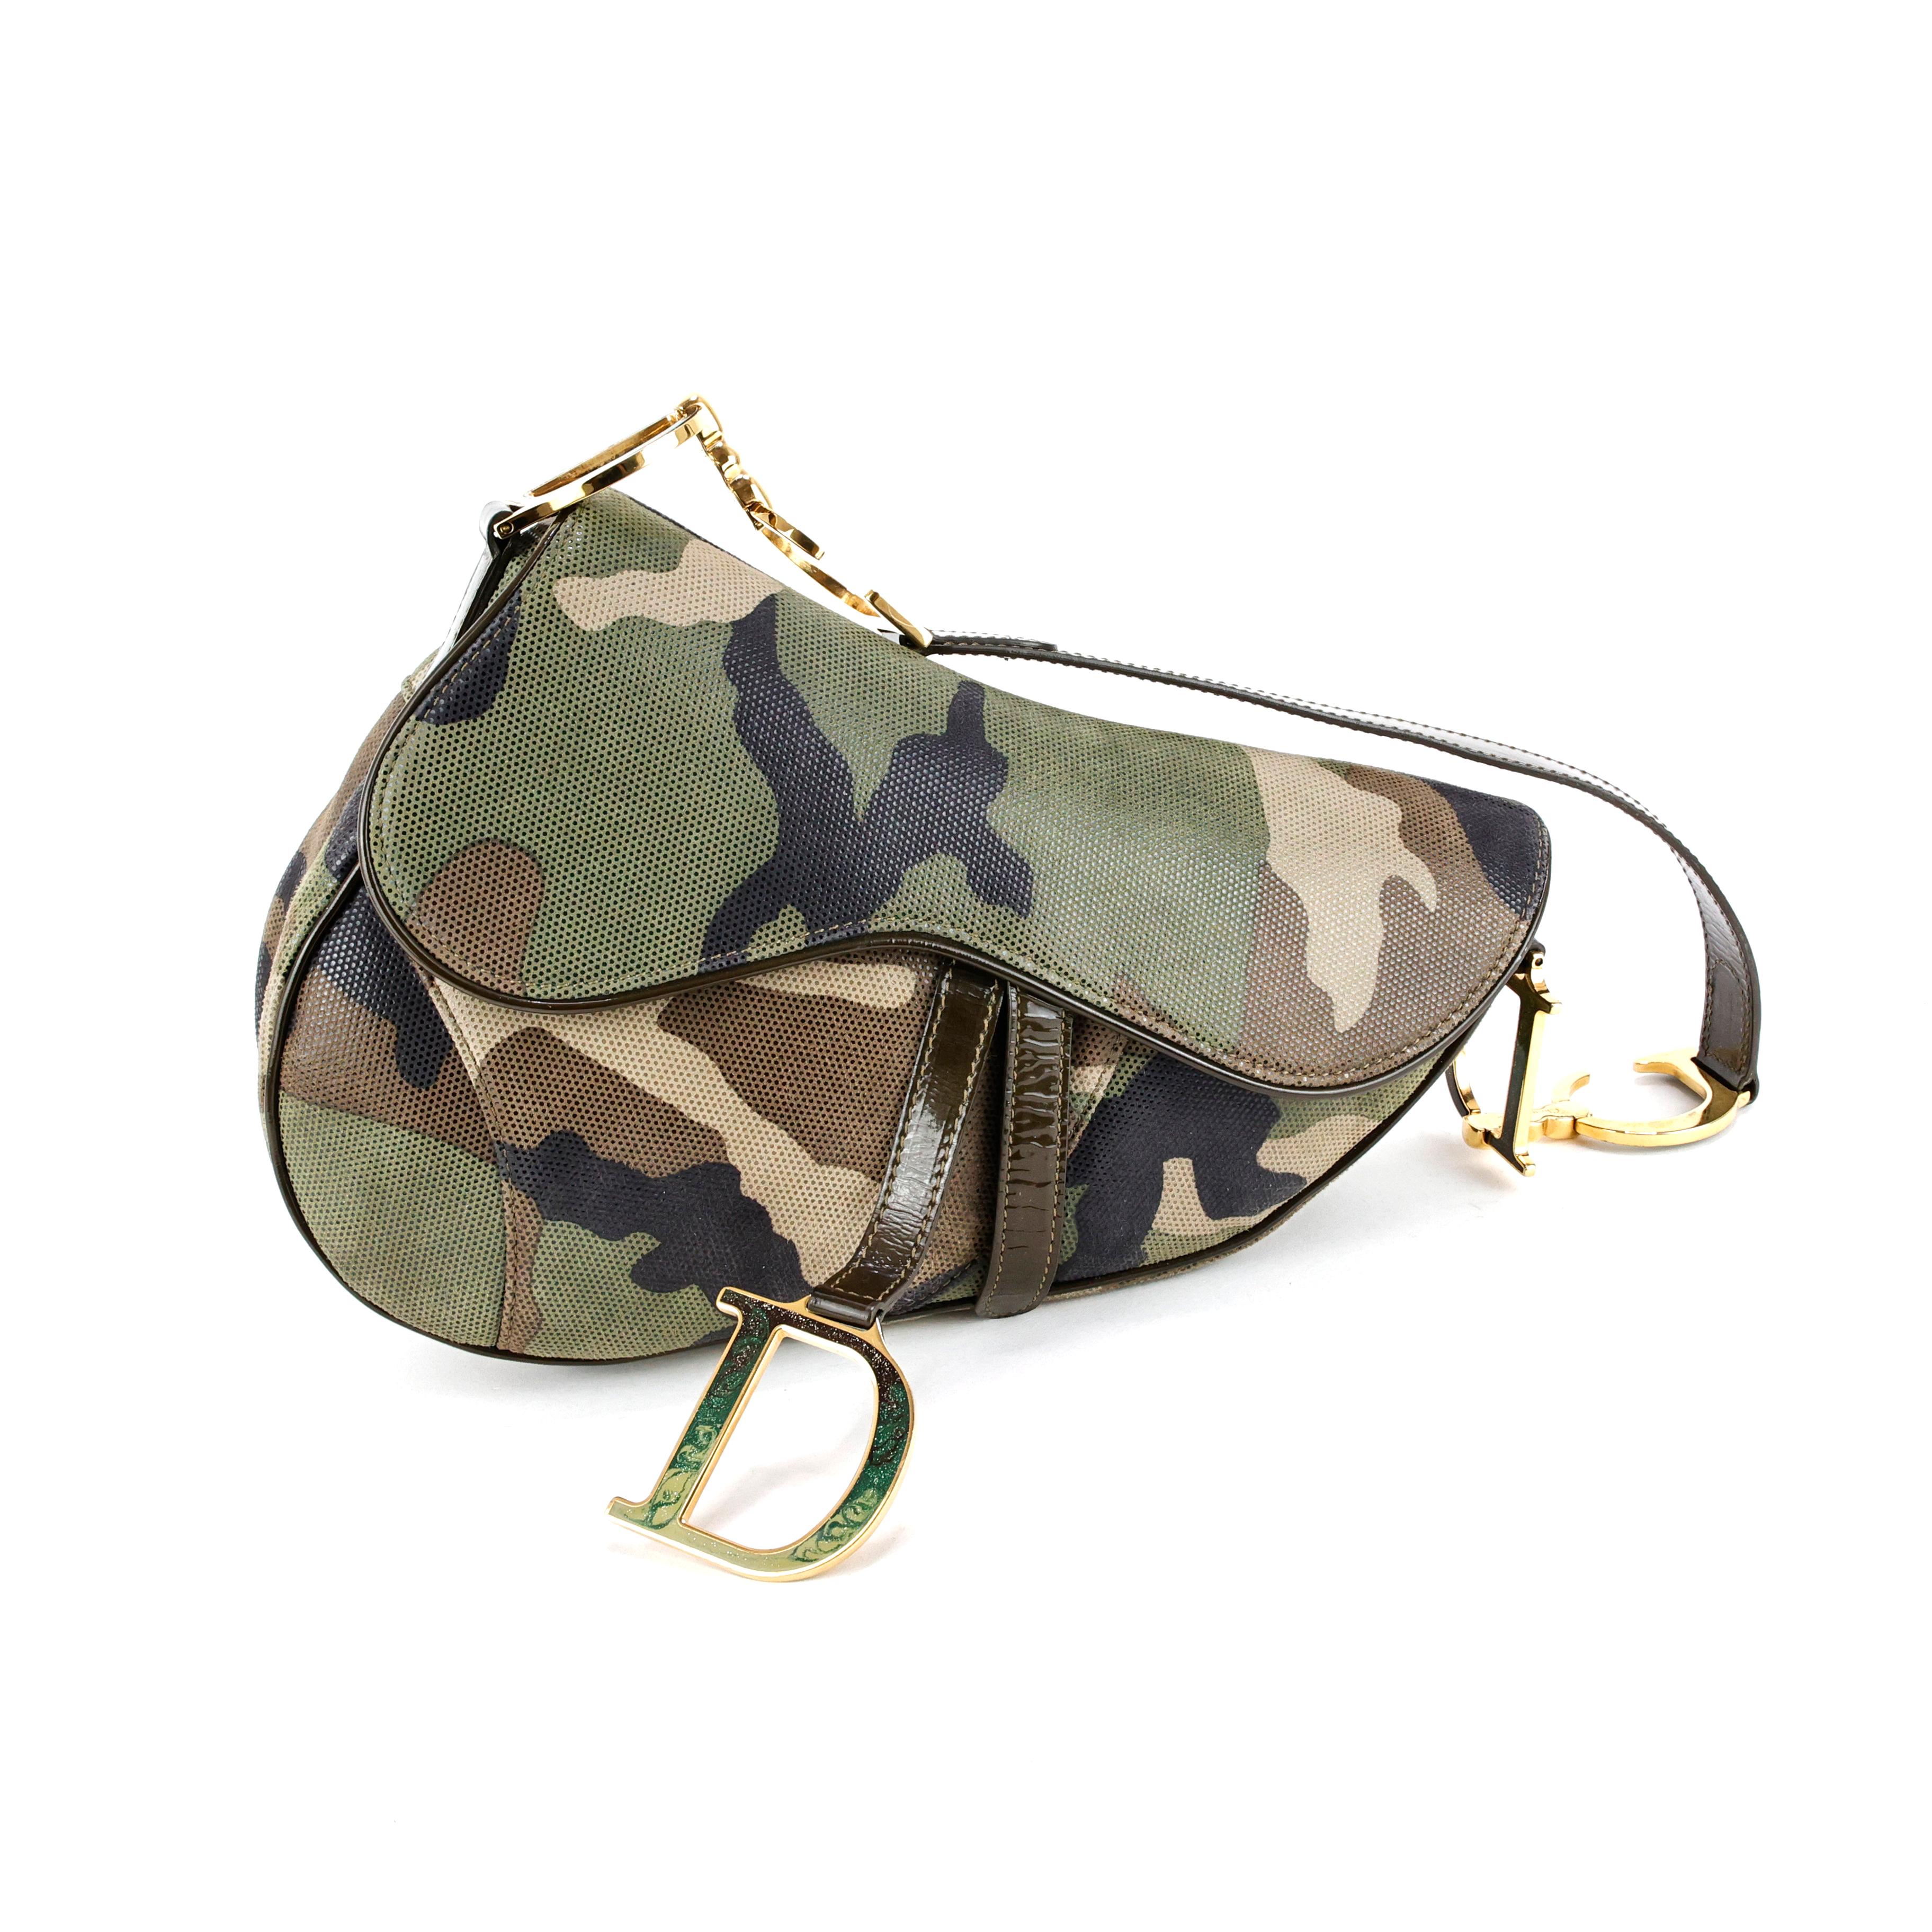 Christian Dior by John Galliano 2000s Camouflage Saddle bag For Sale 4